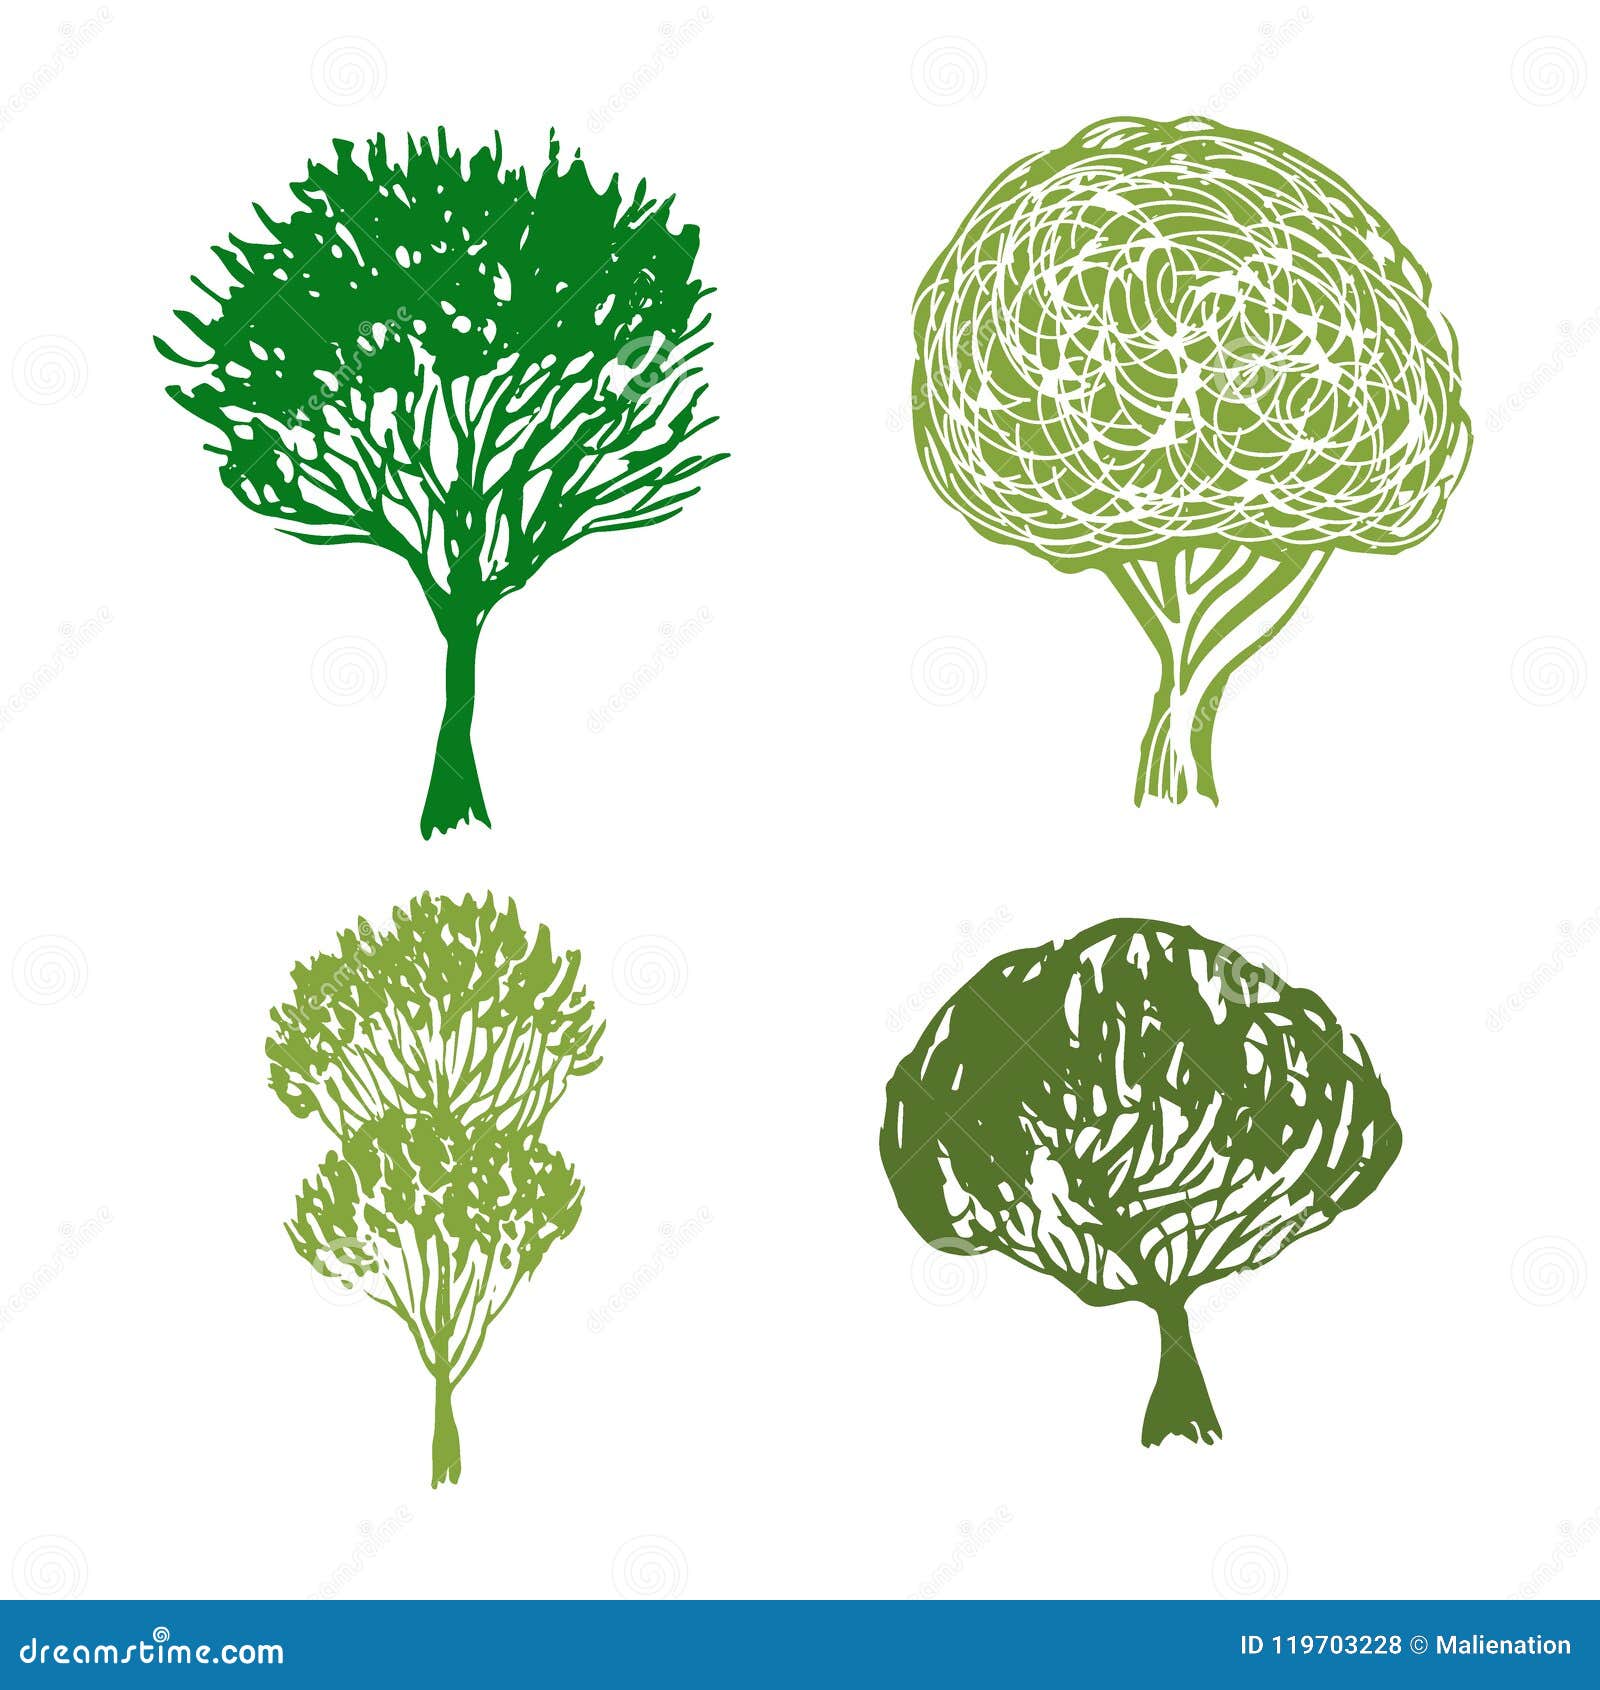 Trees handdrawn vector. Sketched isolated garden elements. Green silhouette icons.